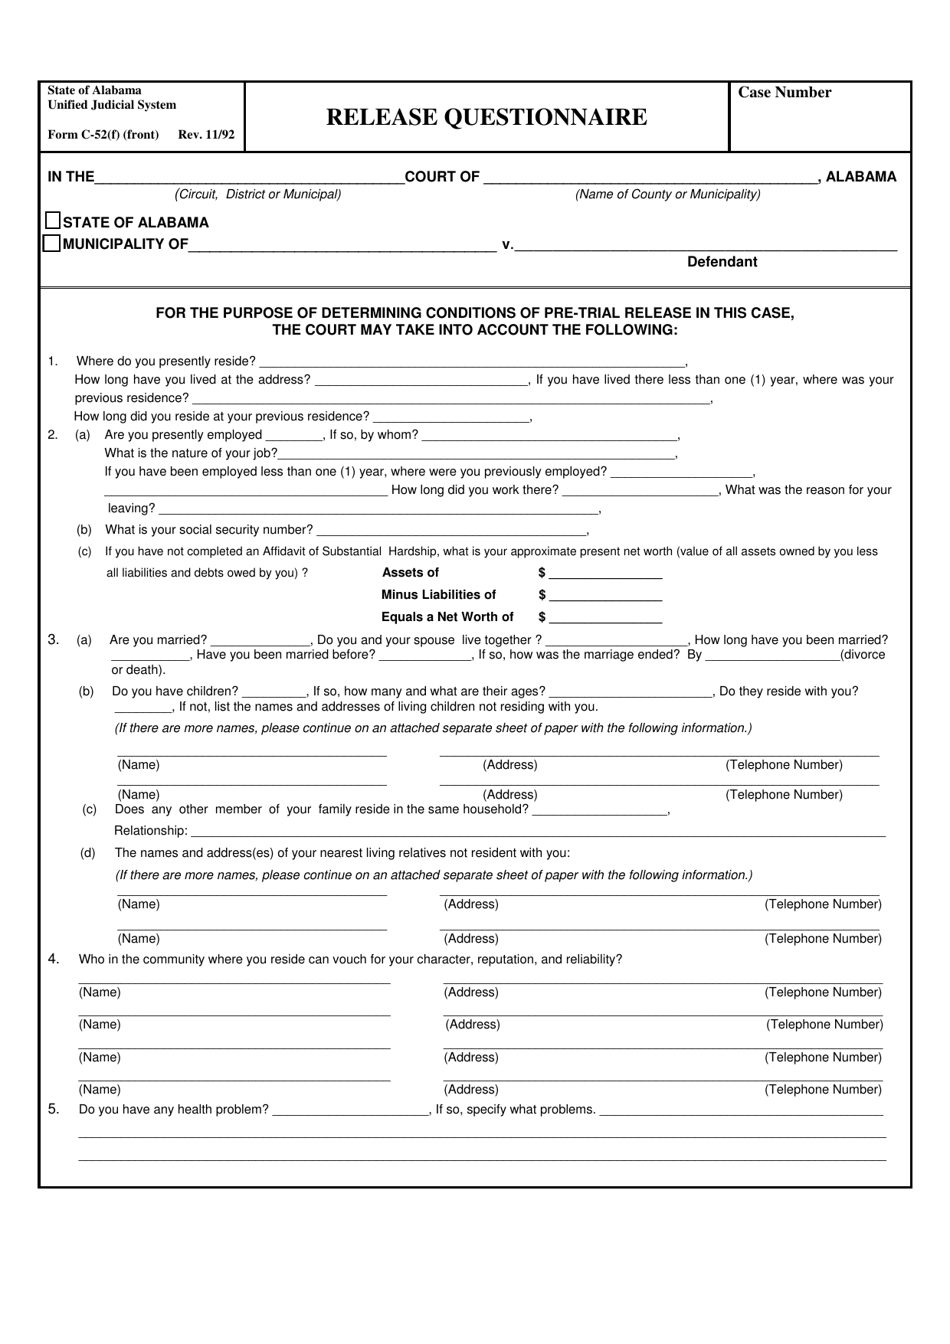 Form C-52(F) Release Questionnaire - Alabama, Page 1